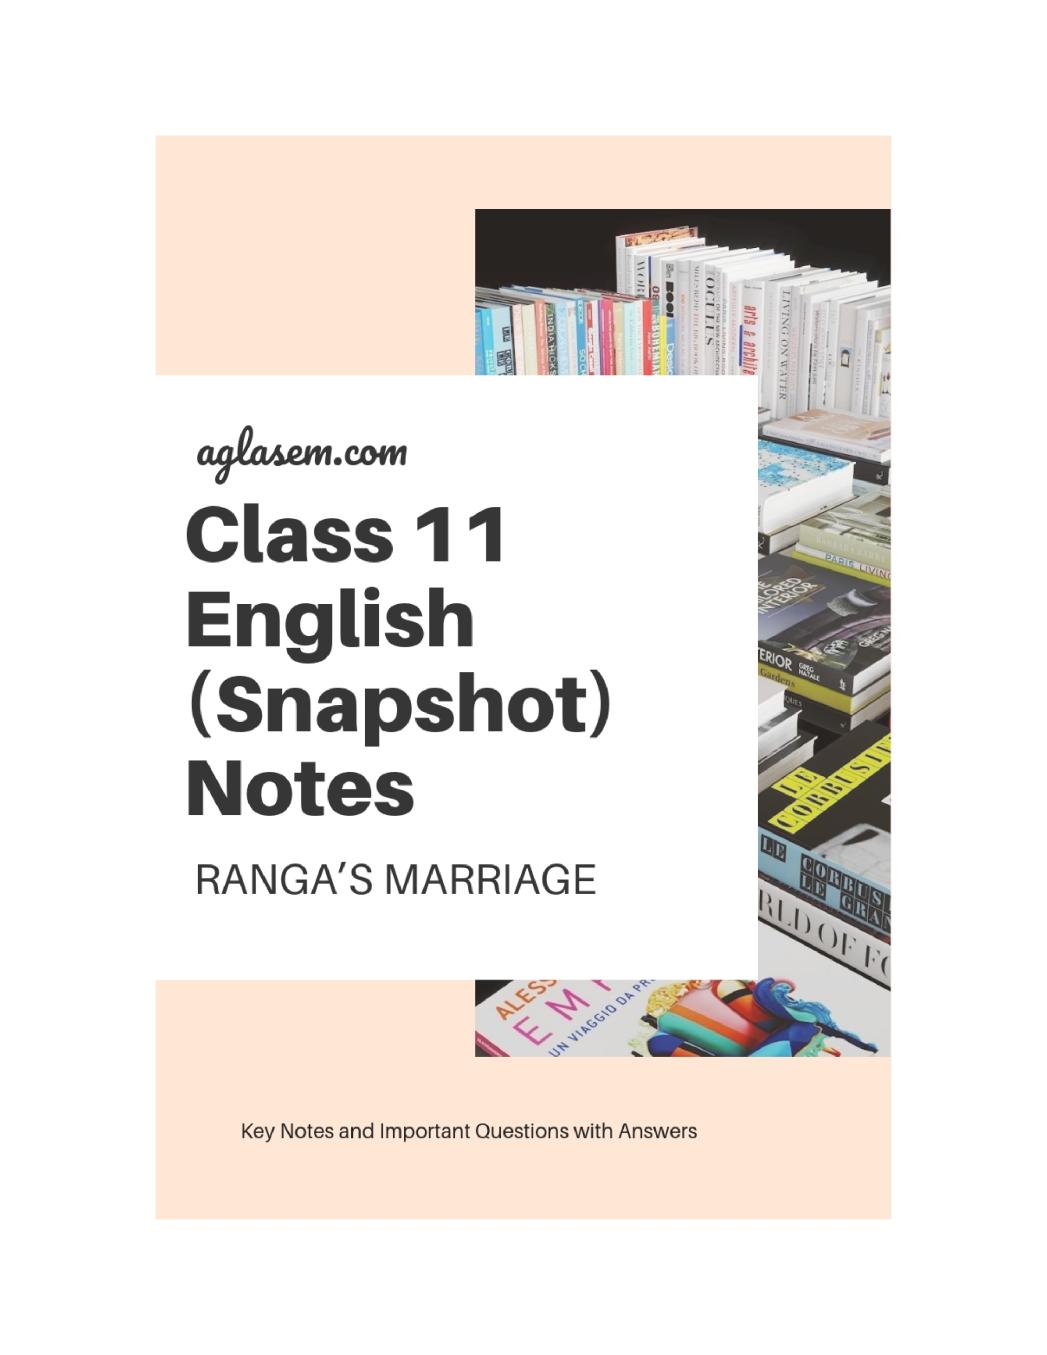 Class 11 English Snapshot Notes For Ranga’s Marriage - Page 1